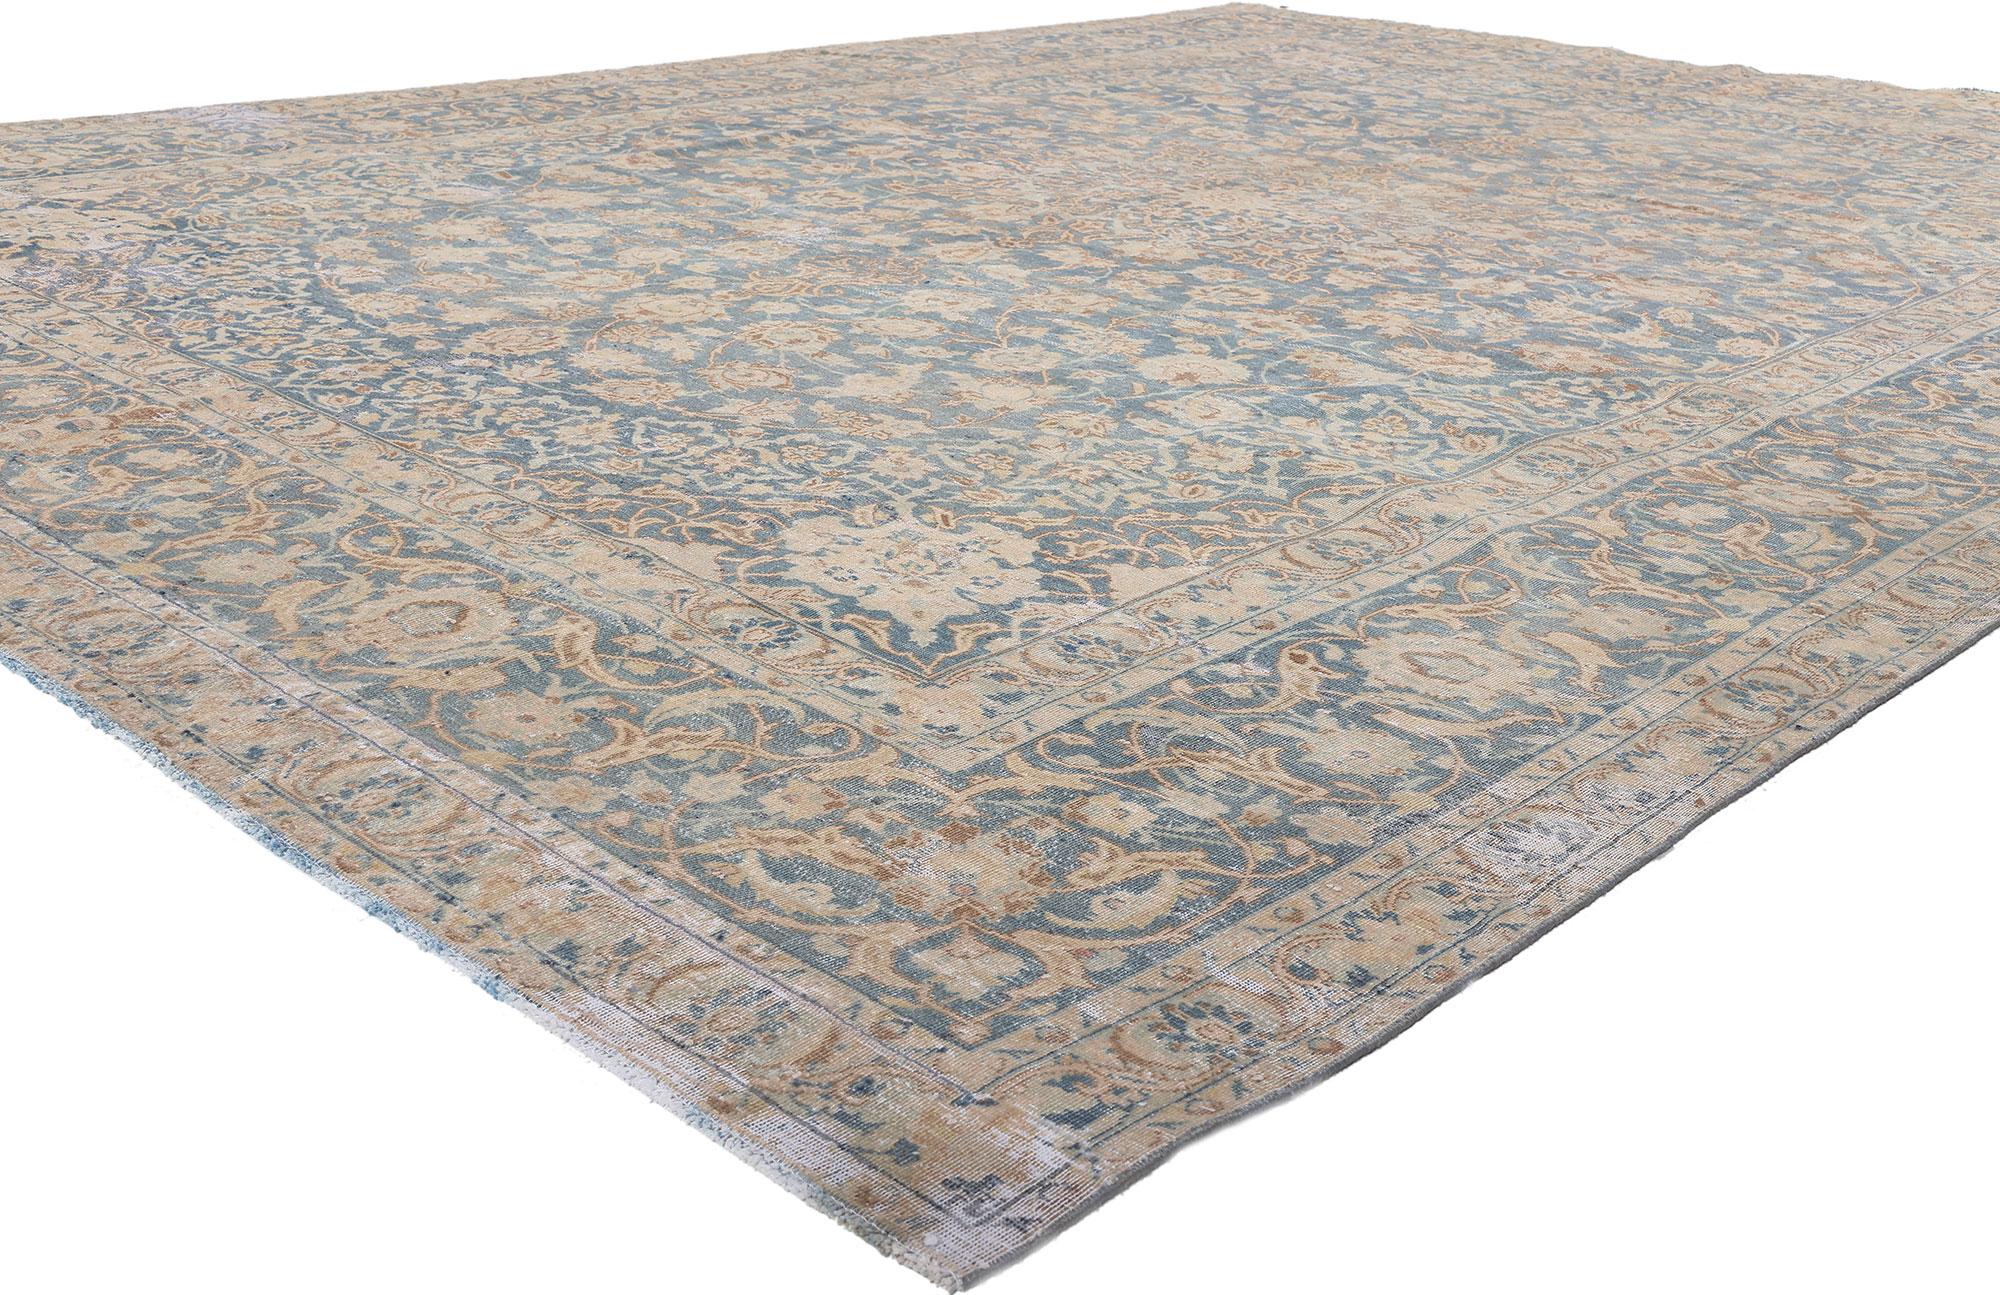 61244 Distressed Antique Persian Tabriz Rug, 08'09 x 12'00. 
Emulating understated elegance with incredible detail and texture, this hand knotted wool distressed antique Persian Tabriz rug is a captivating vision of woven beauty. The intricate